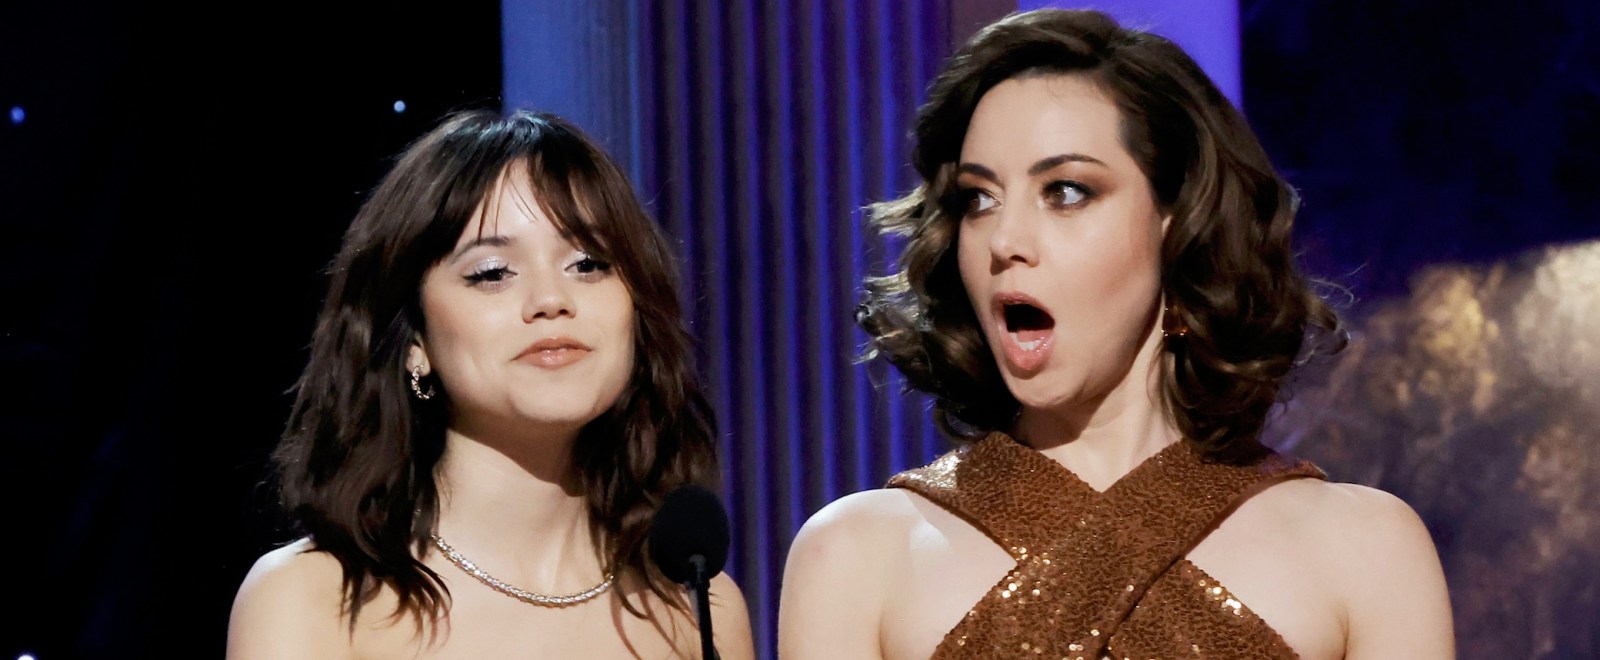 Aubrey Plaza Wasn't Upset at the SAG Awards, Her 'White Lotus' Co